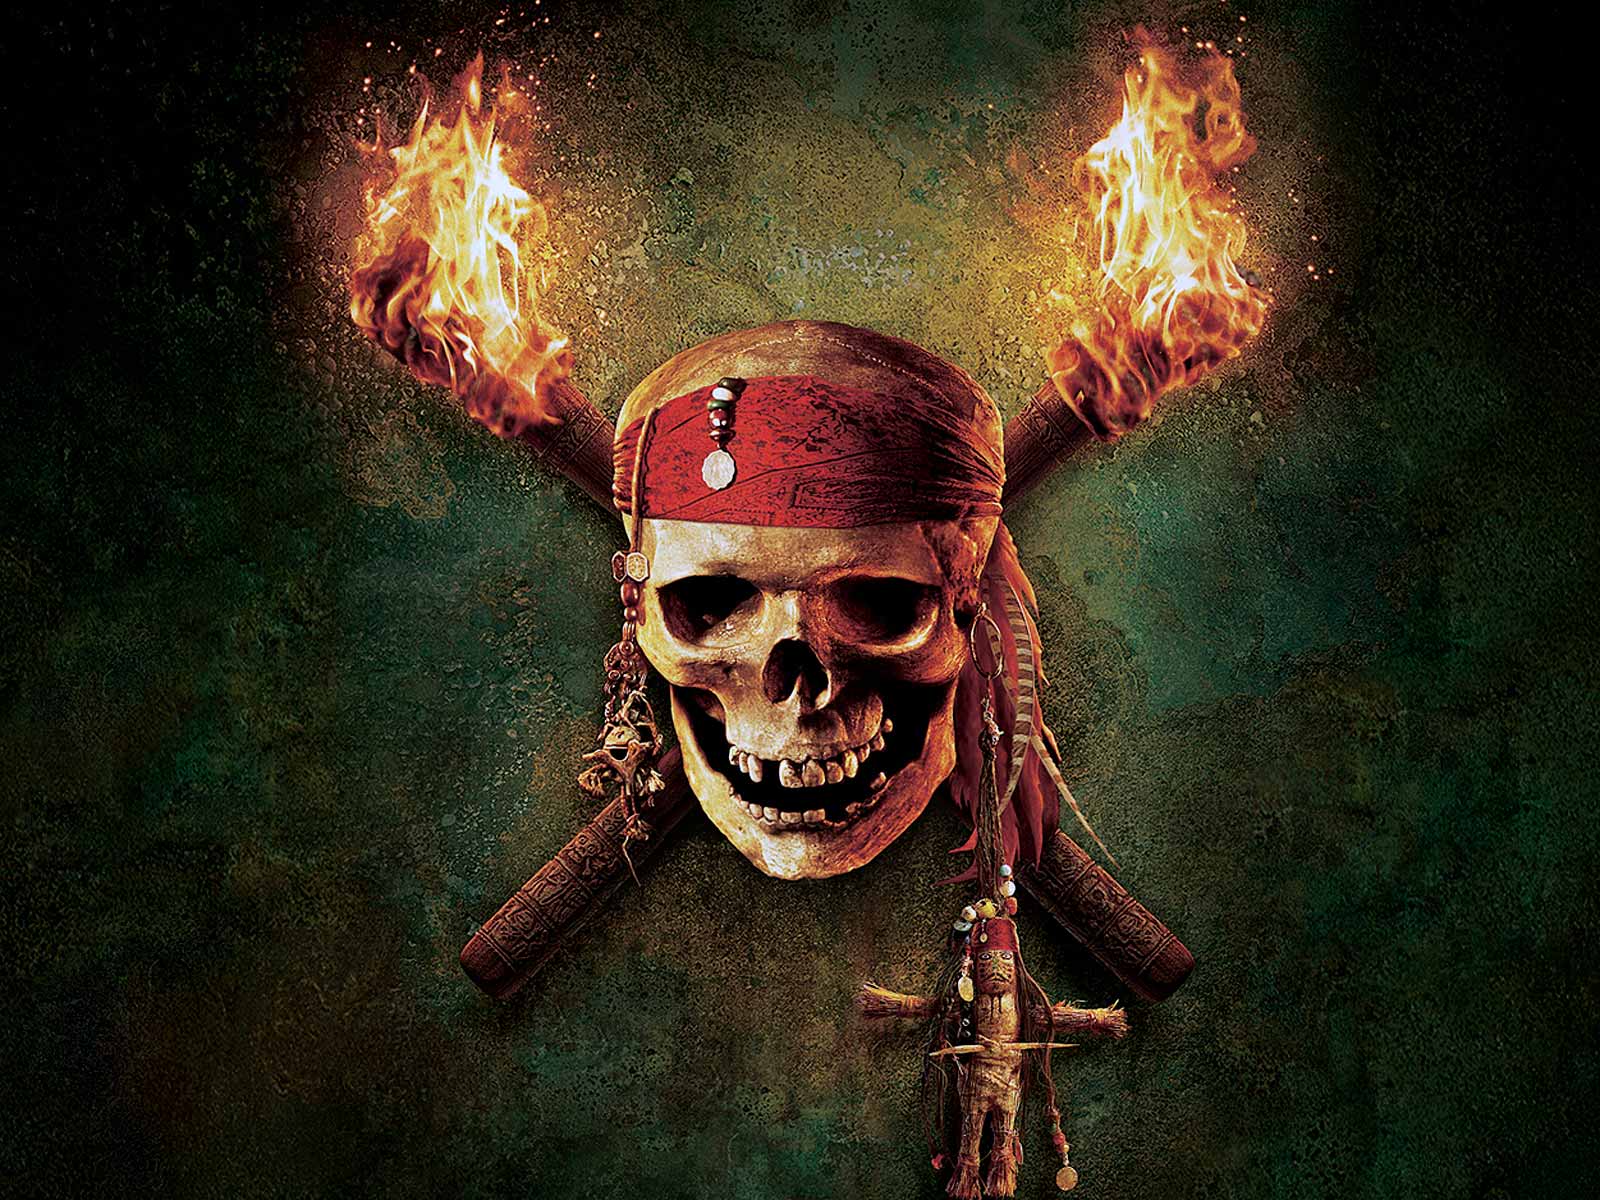  Caribbean Skull   HD Action Movie Wallpapers   Pirates of Caribbean